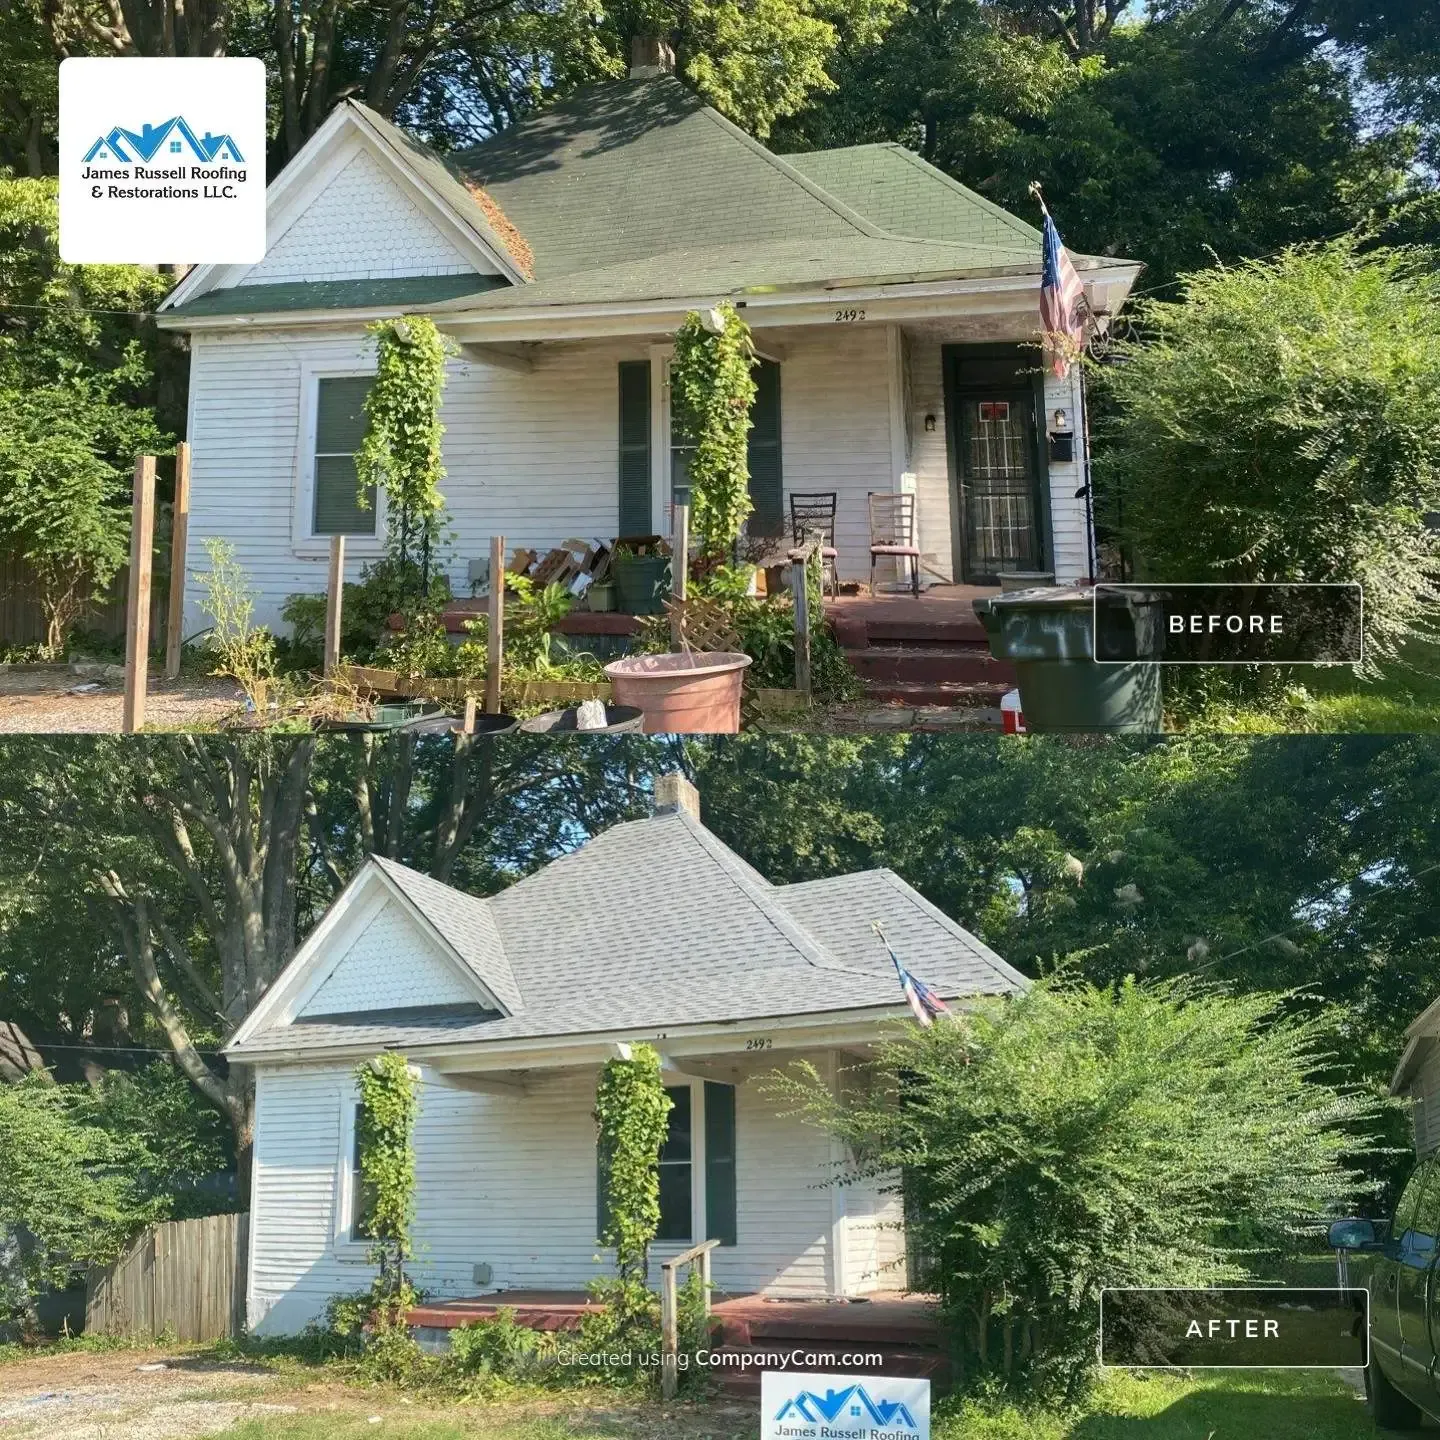 Roofing before and after from James Russell Roofing.